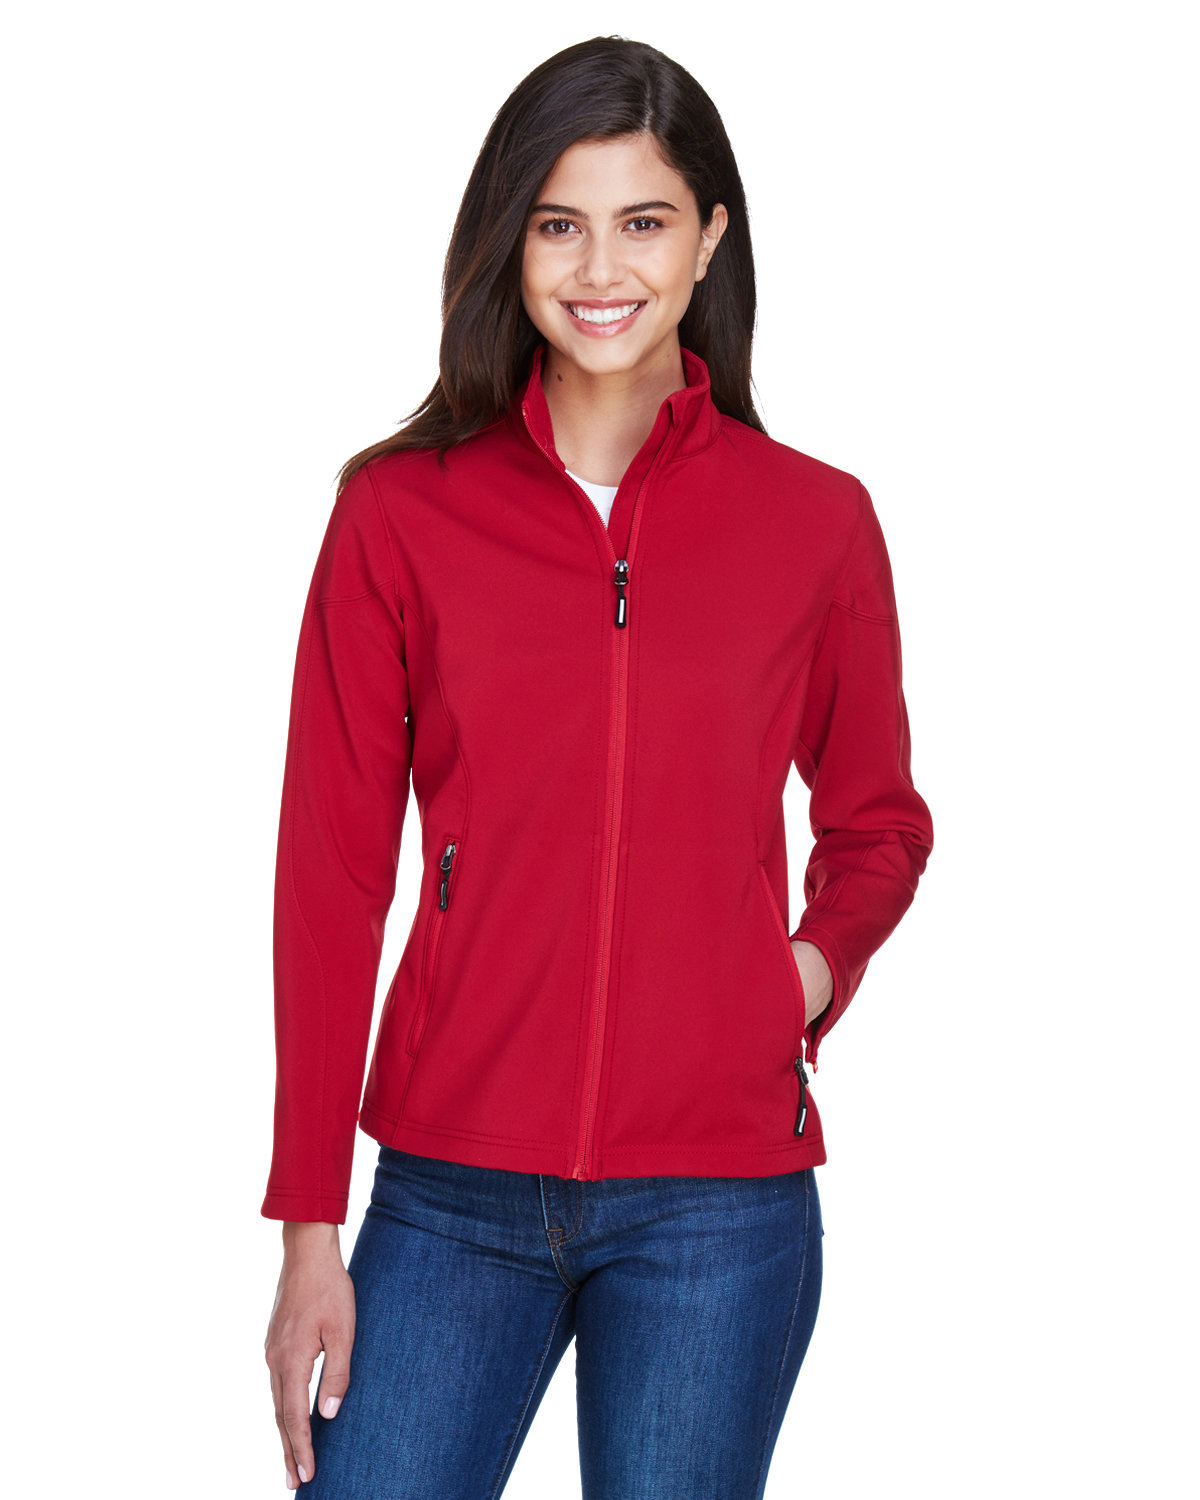 Core 365 Ladies' Cruise Two-Layer Fleece Bonded Soft Shell Jacket CLASSIC RED 